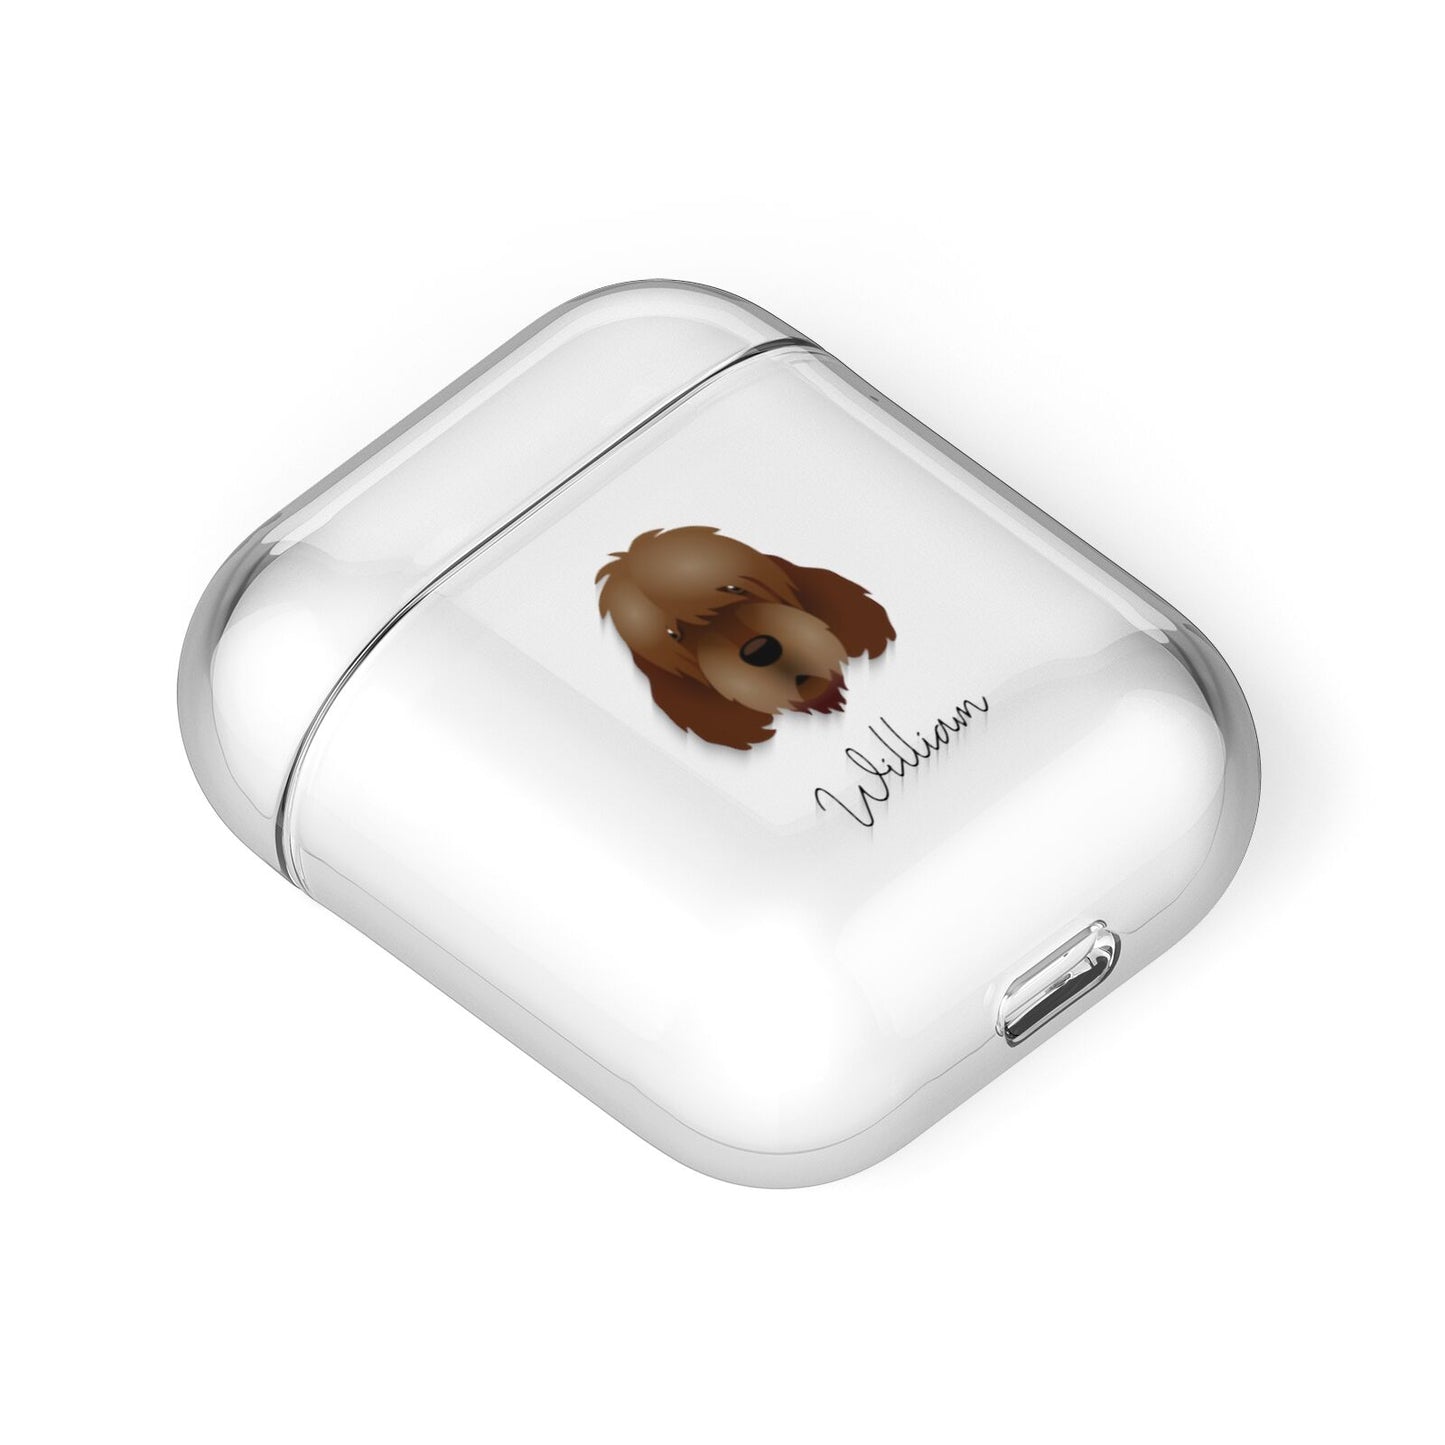 Otterhound Personalised AirPods Case Laid Flat